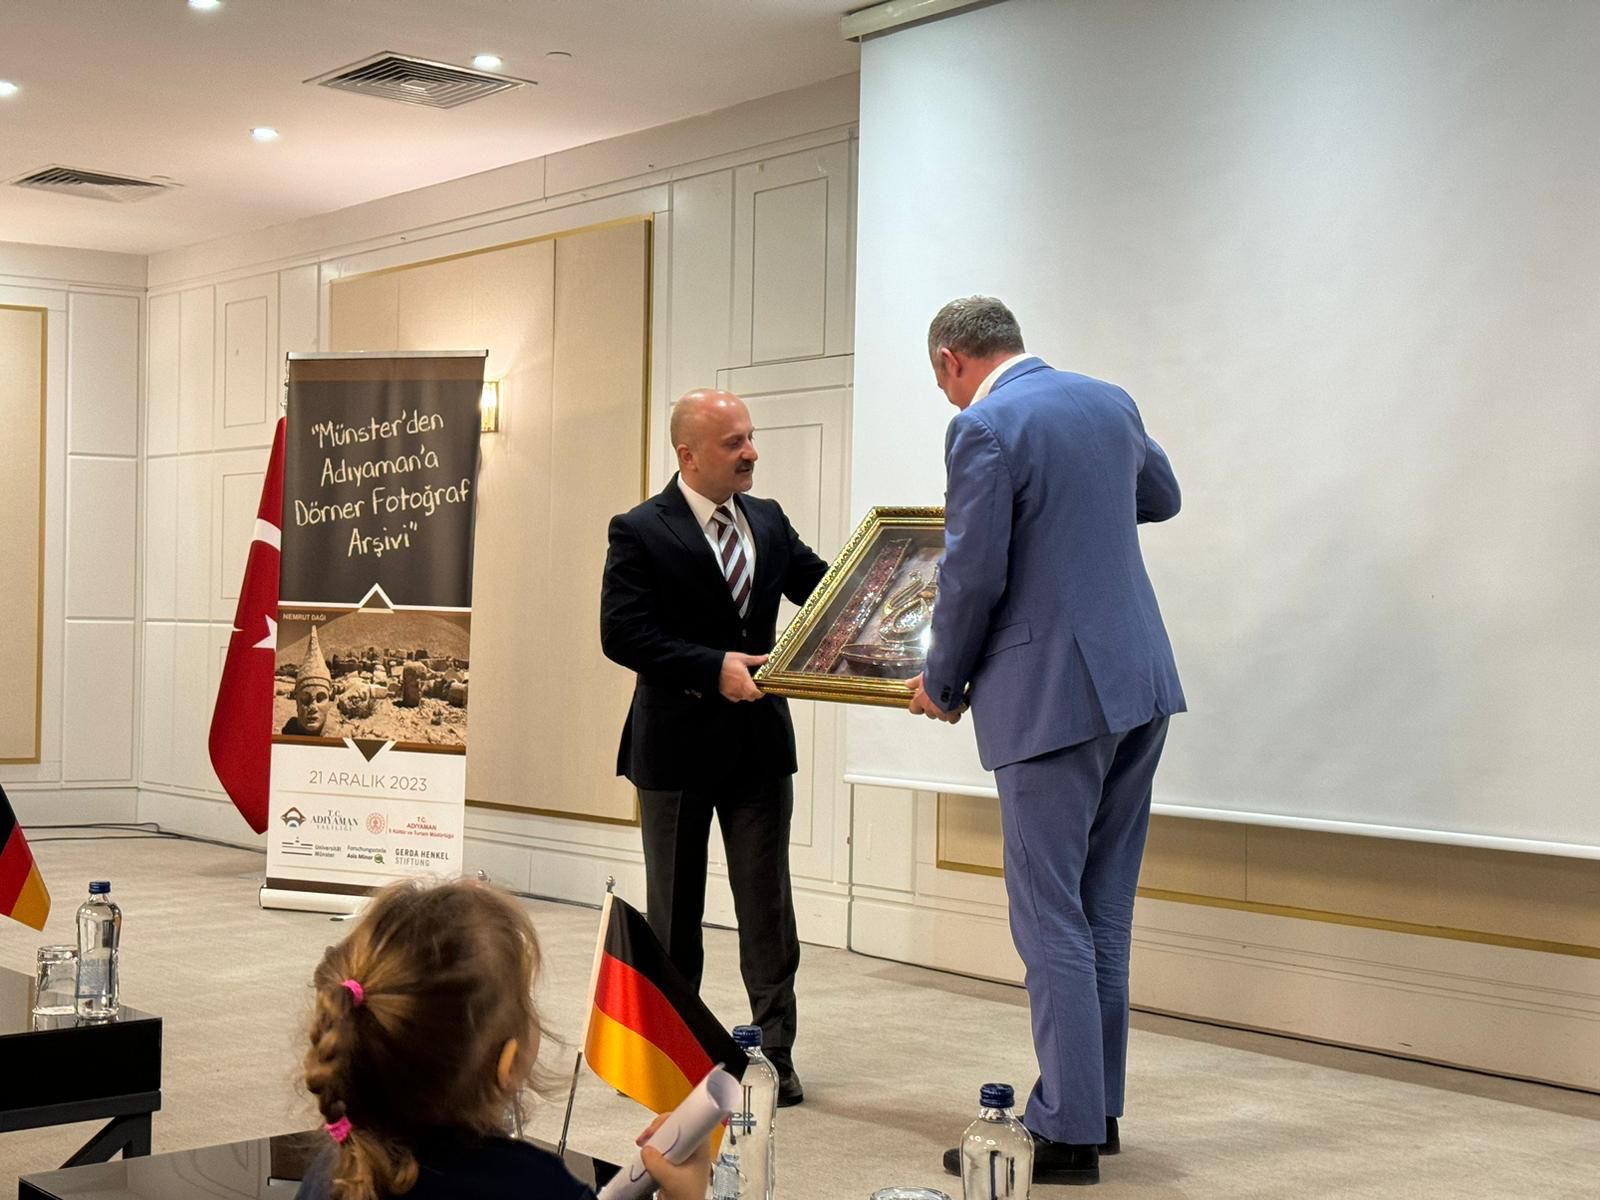 EMCC Professor Michael Blömer receives a gift from the Governor of Adıyaman Province in gratitude for the support provided to the region hit hard by the earthquake disaster.